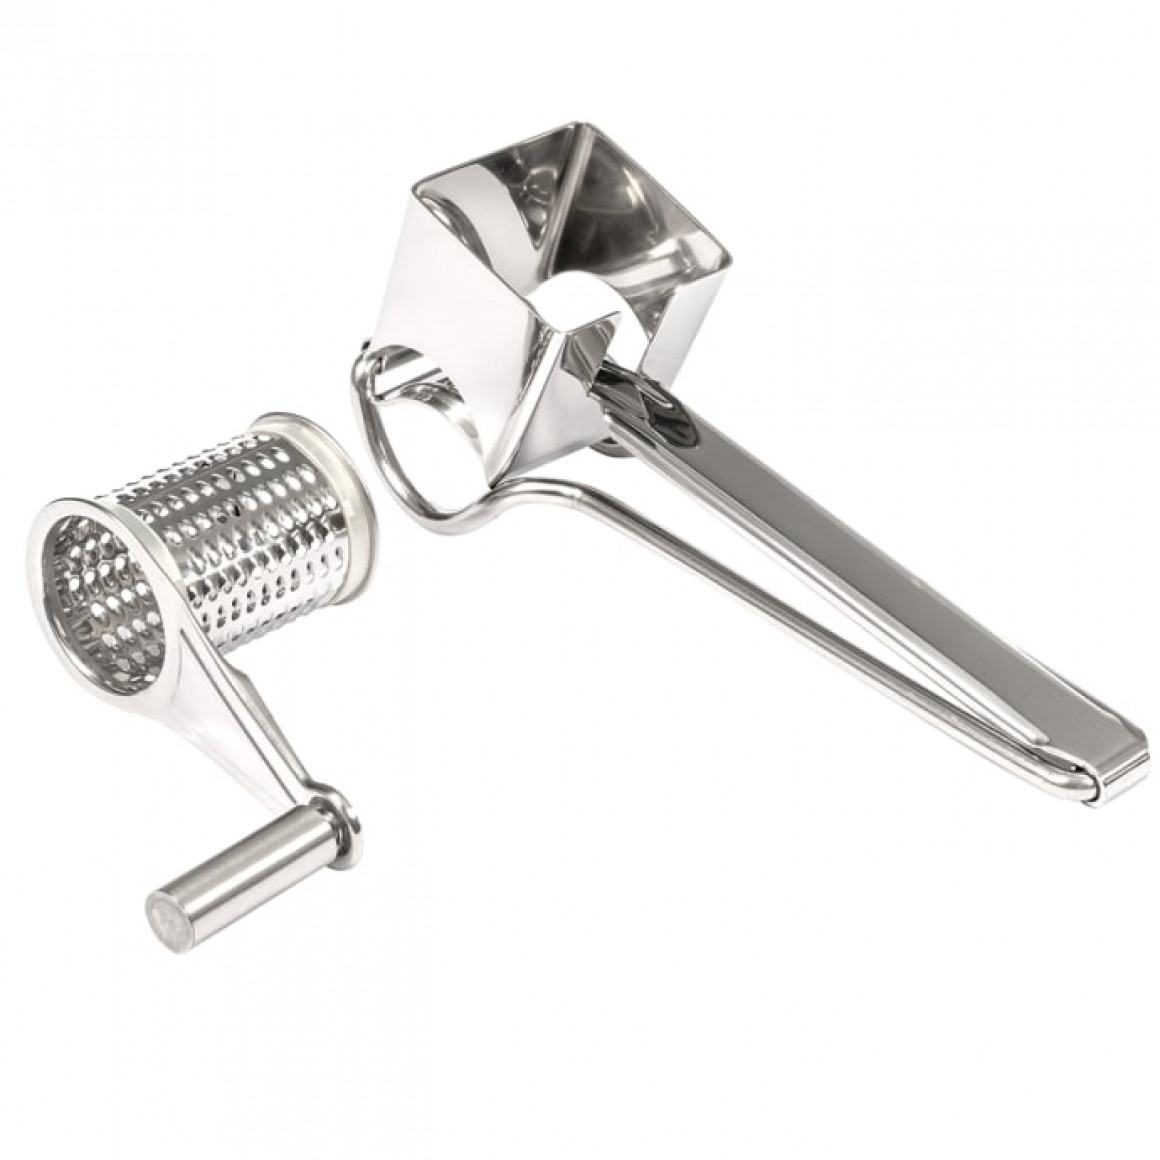 CHEESE GRATER, HANDCRANK, STAINLESS STEEL